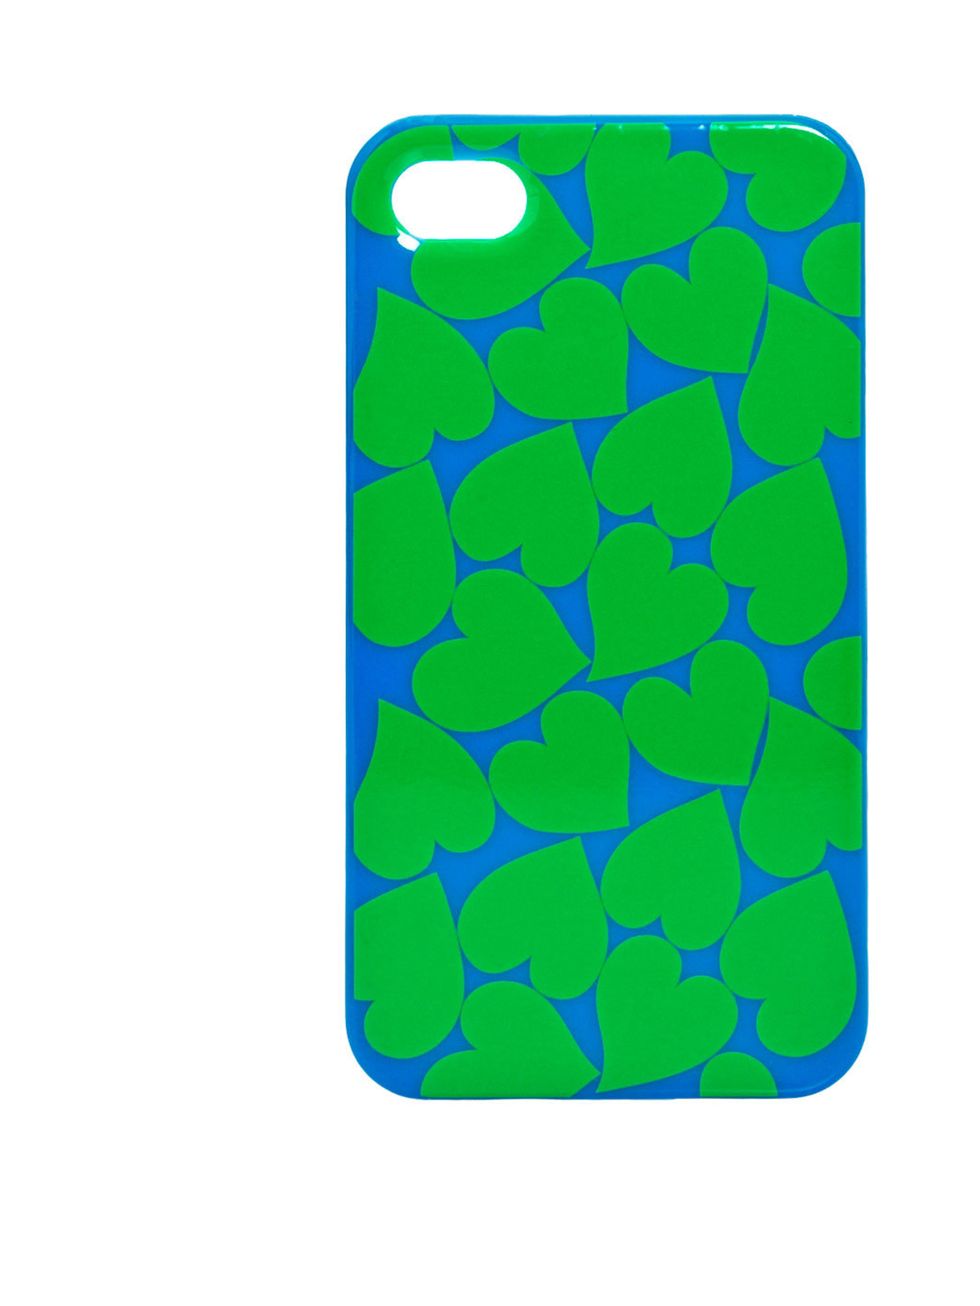 <p>Marc by Marc Jacobs heart print case, £30, at <a href="http://www.liberty.co.uk/fcp/product/Liberty//Green-and-Blue-Heart-Print-iPhone-Case-Marc-by-Marc-Jacobs/76231">Liberty </a></p>